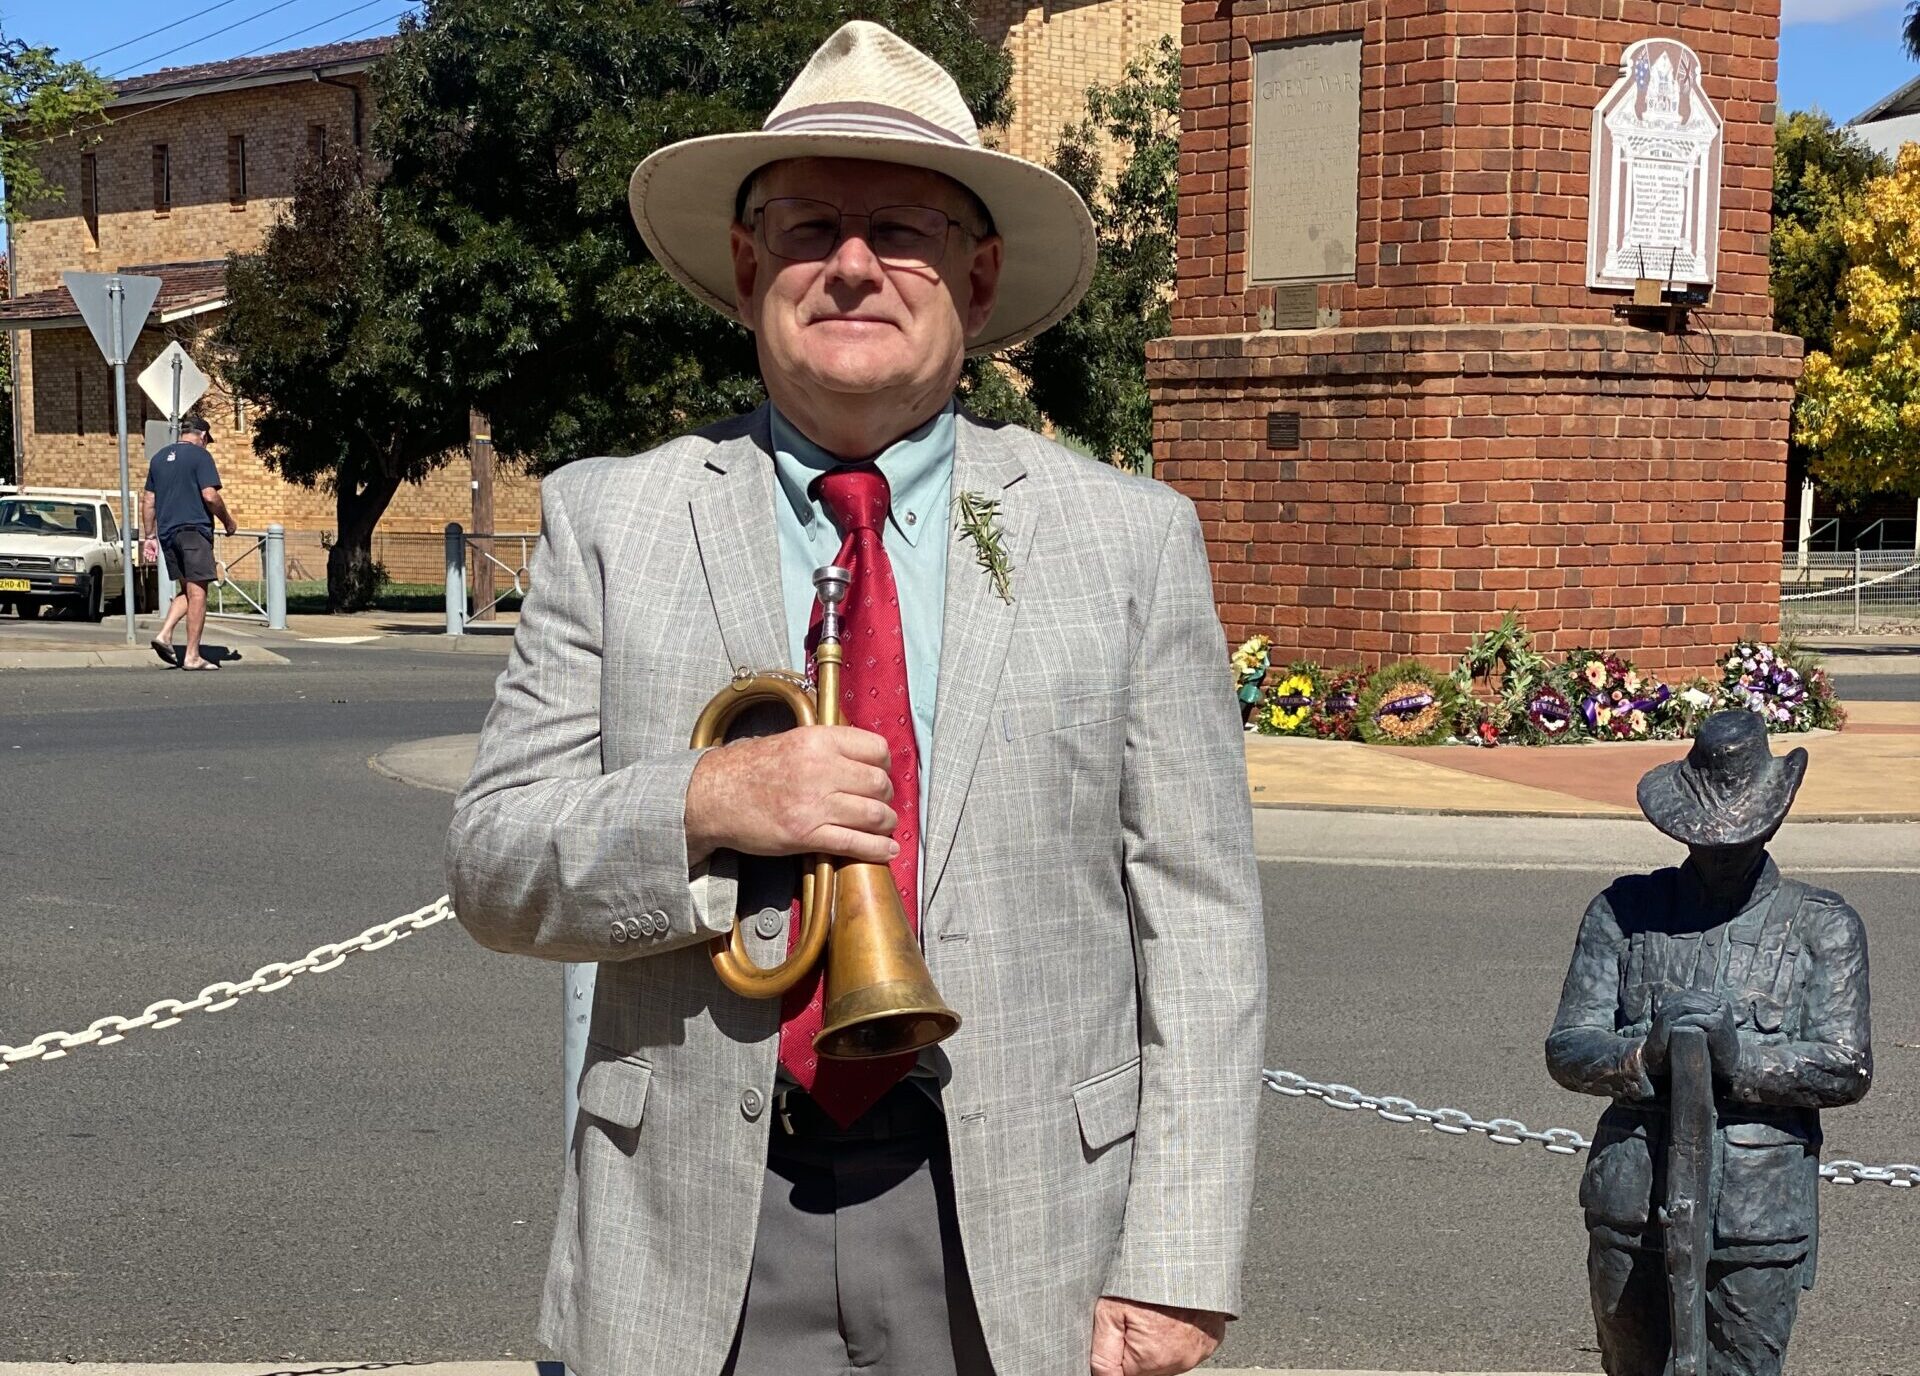 Wee Waa bugler sounds the Last Post for 40 years